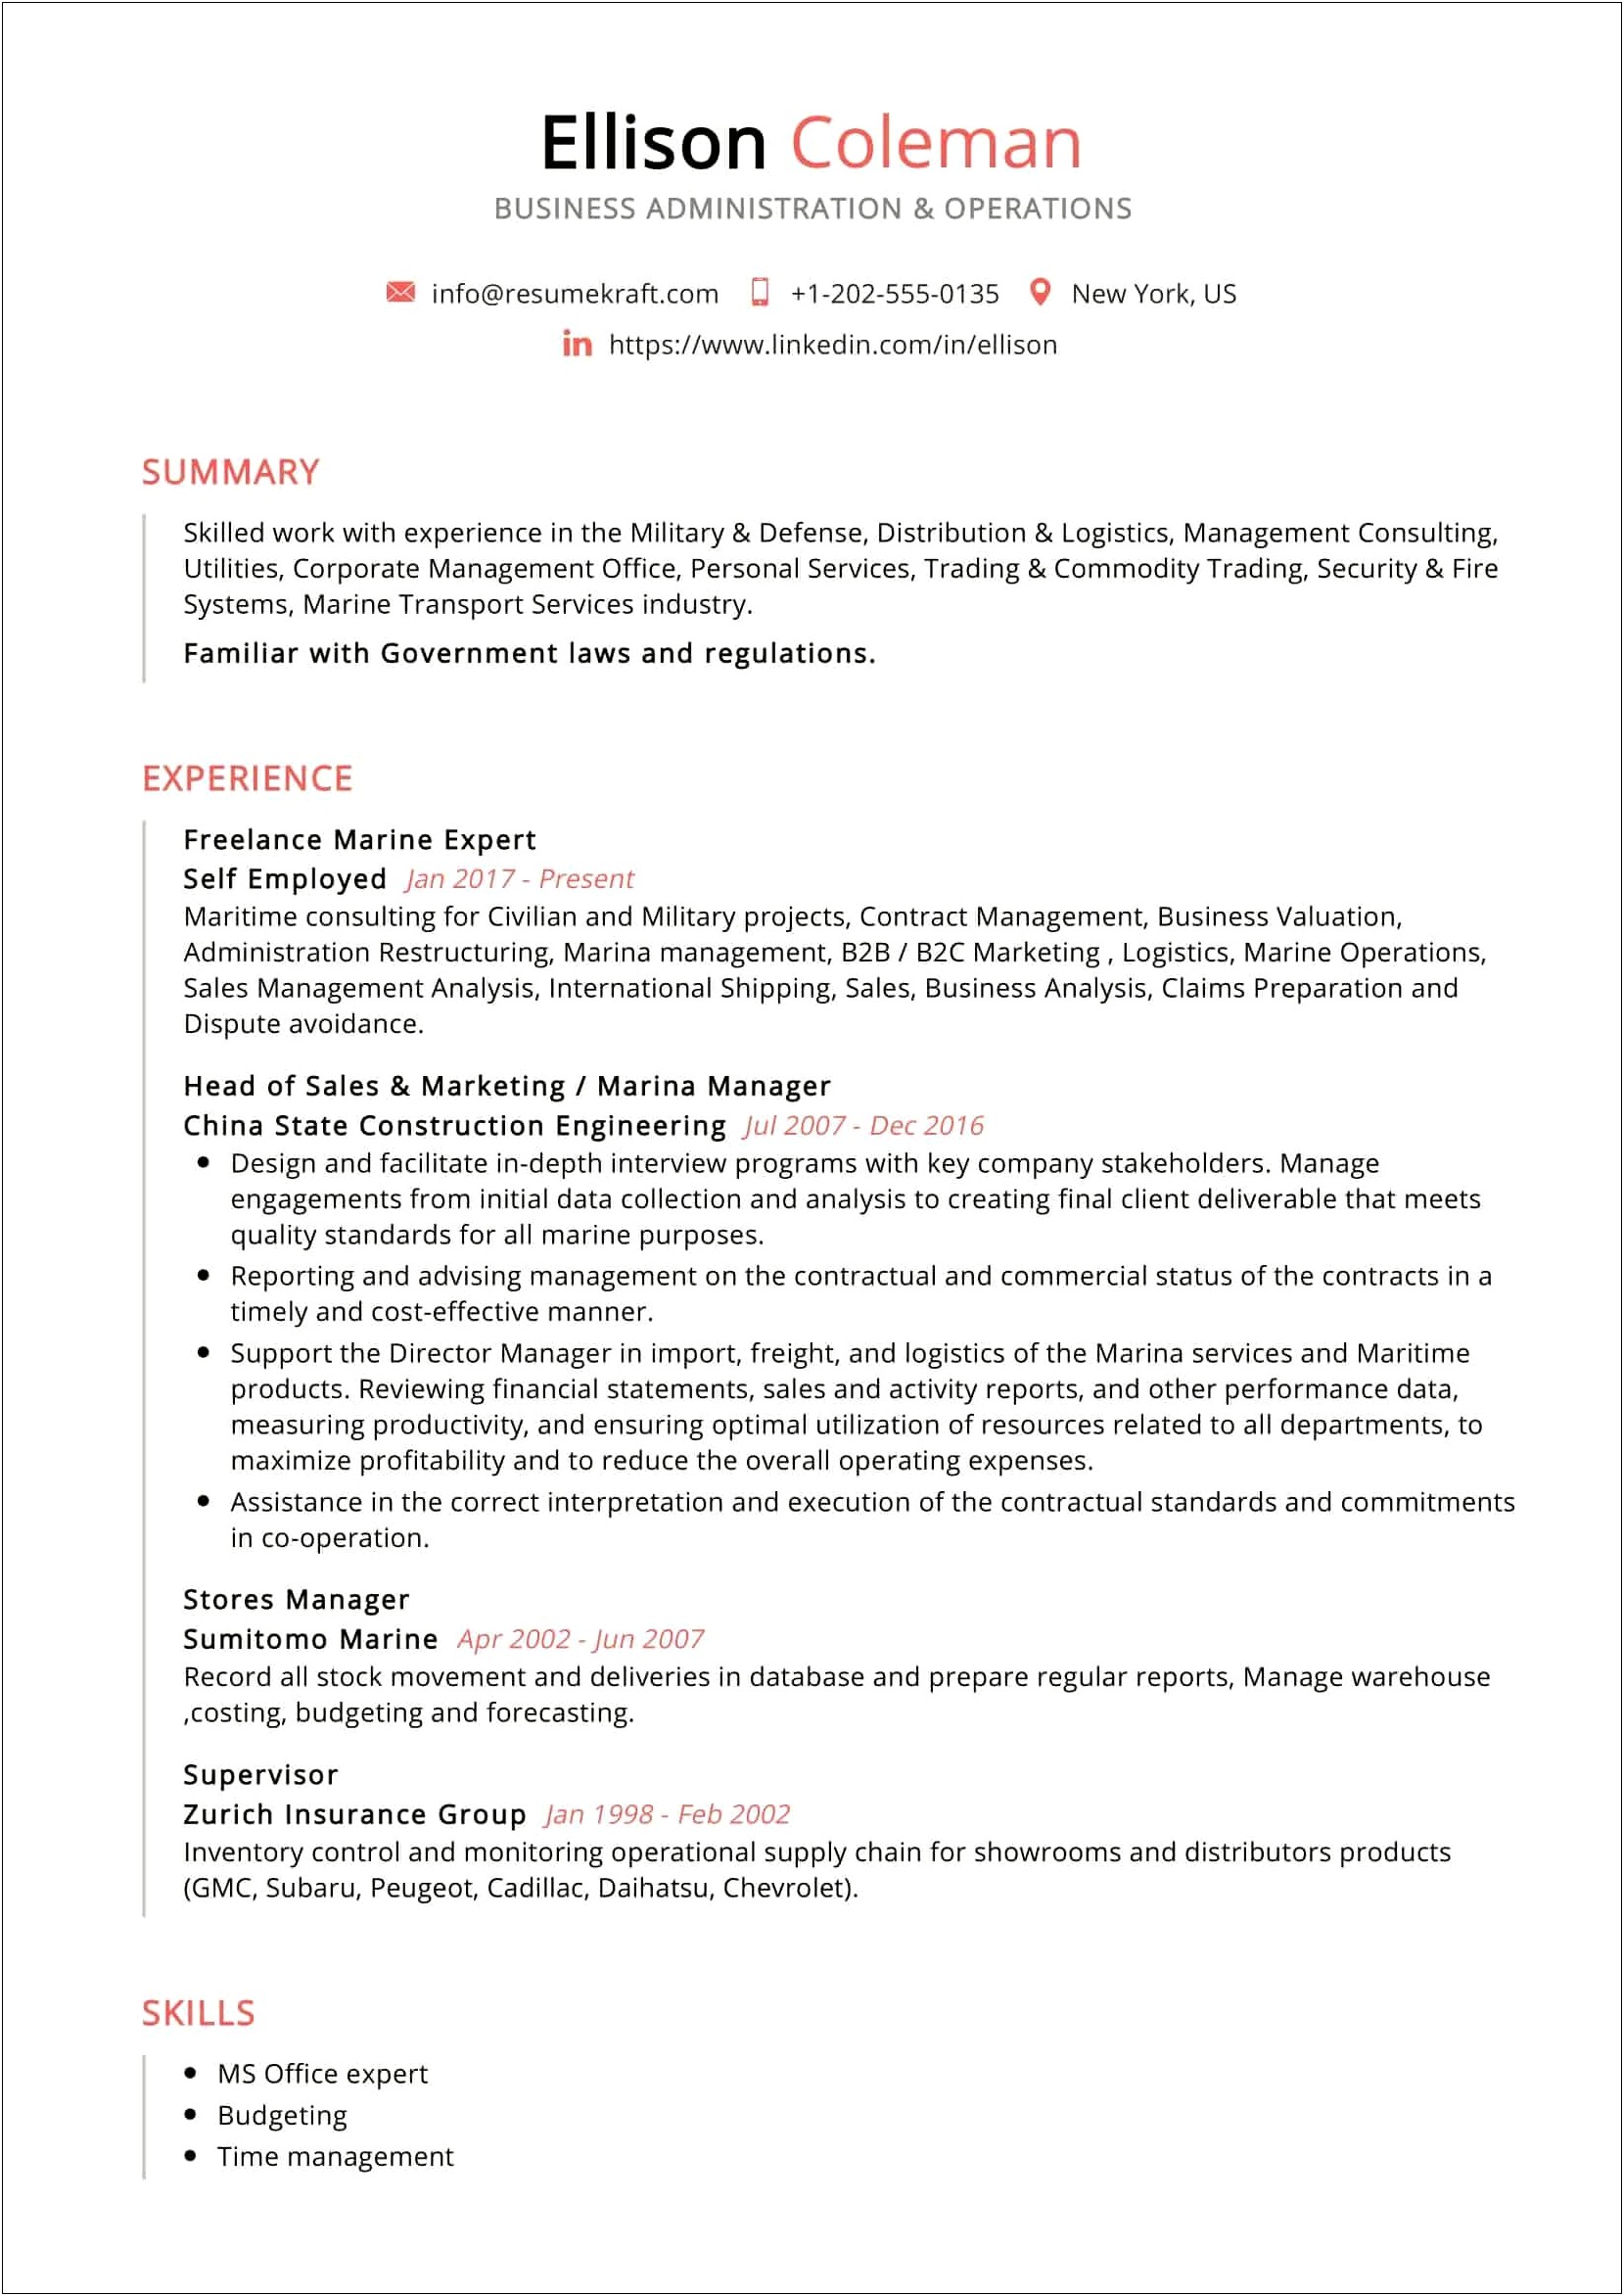 Sample Business Administration Resume Objectives